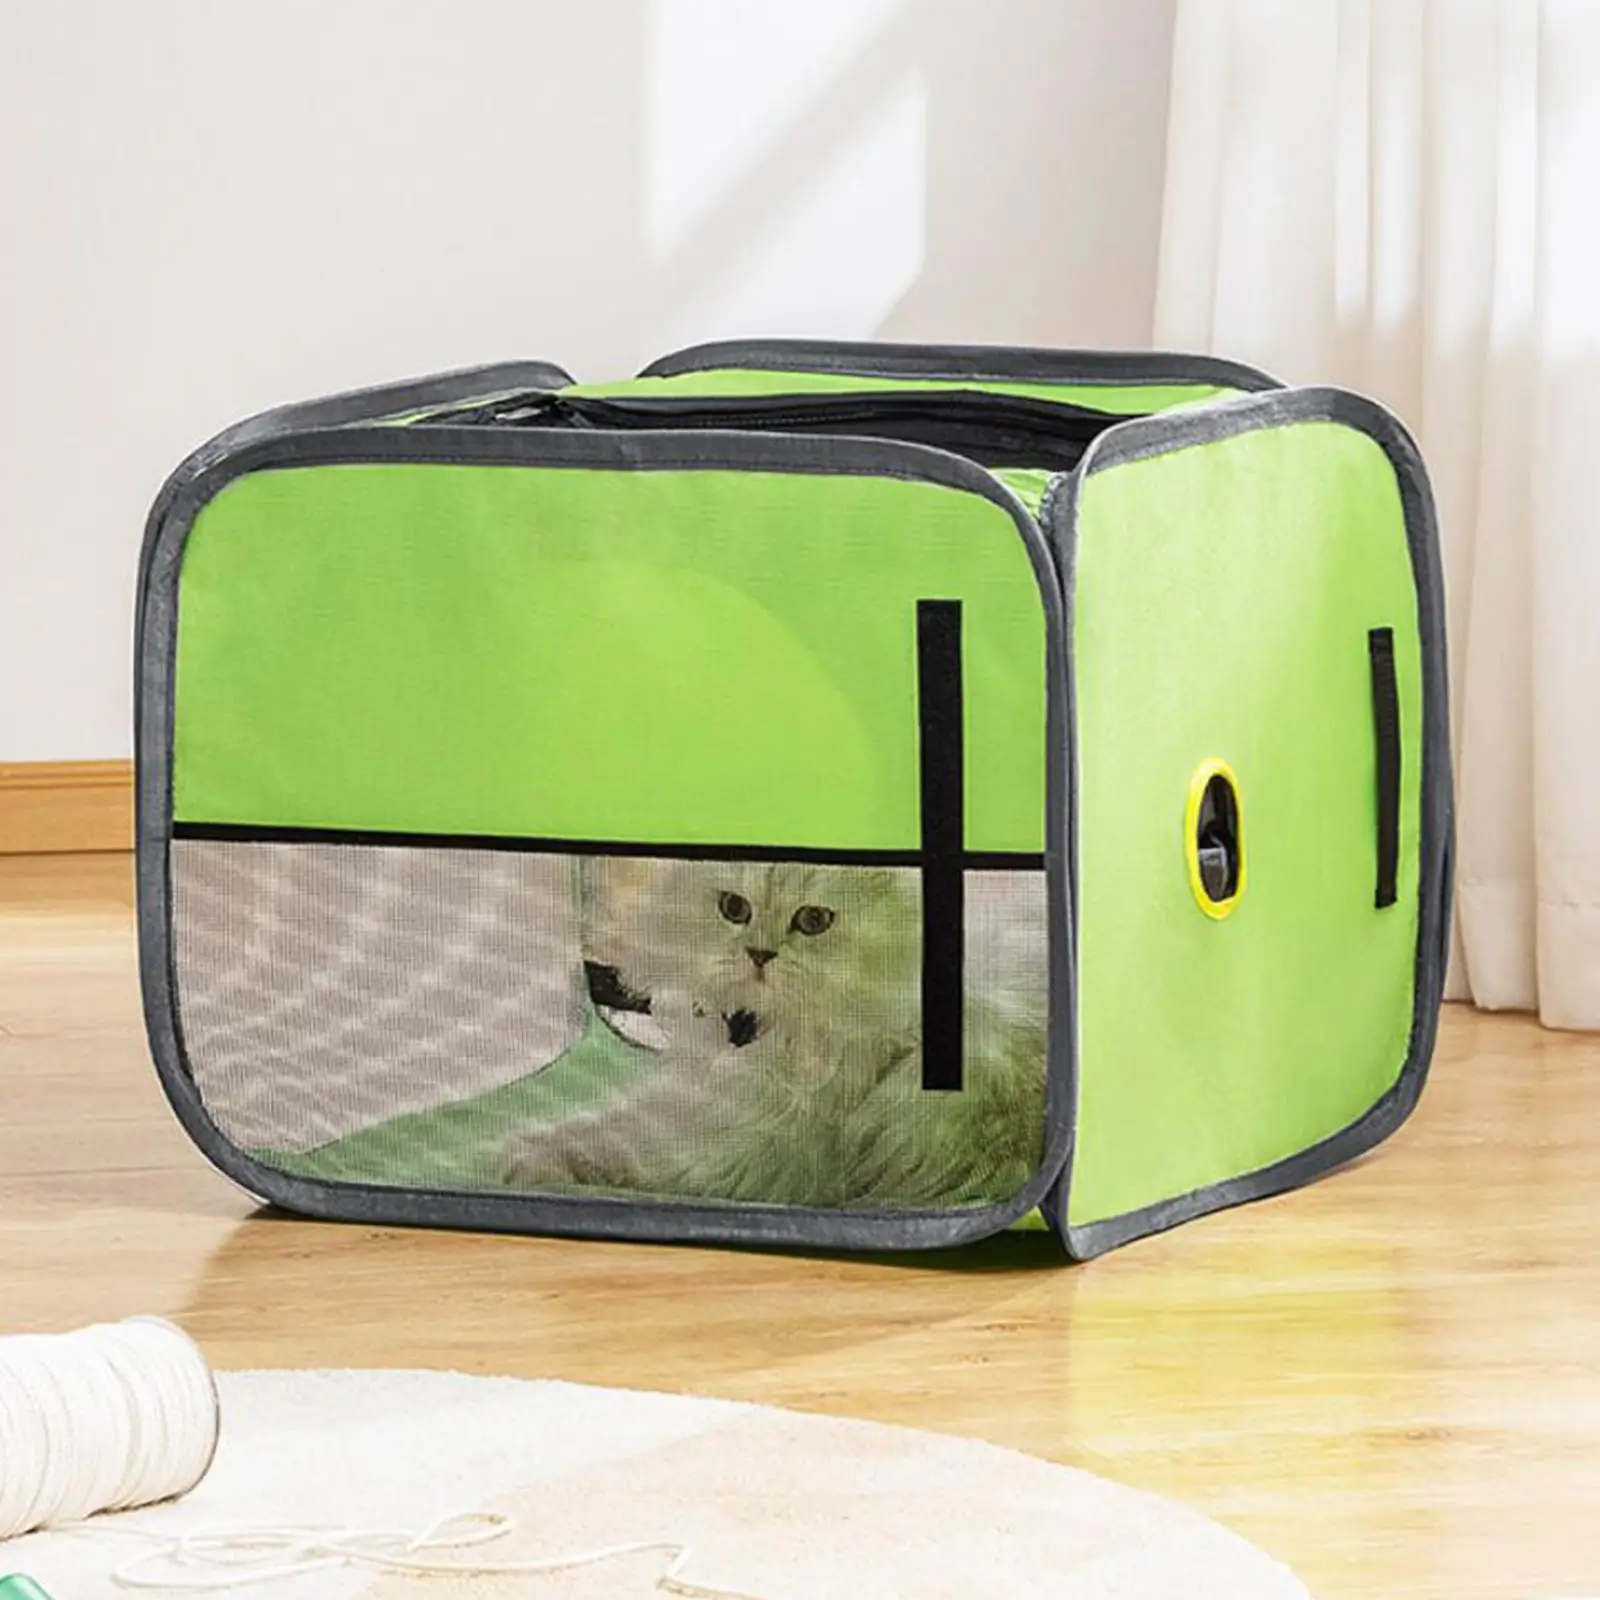 Cats Dogs Dryer Cage Hair Dryer Clean House Grooming Portable Travel Bags Pet Drying Box for Doggy Puppy Kitten Bath Shop